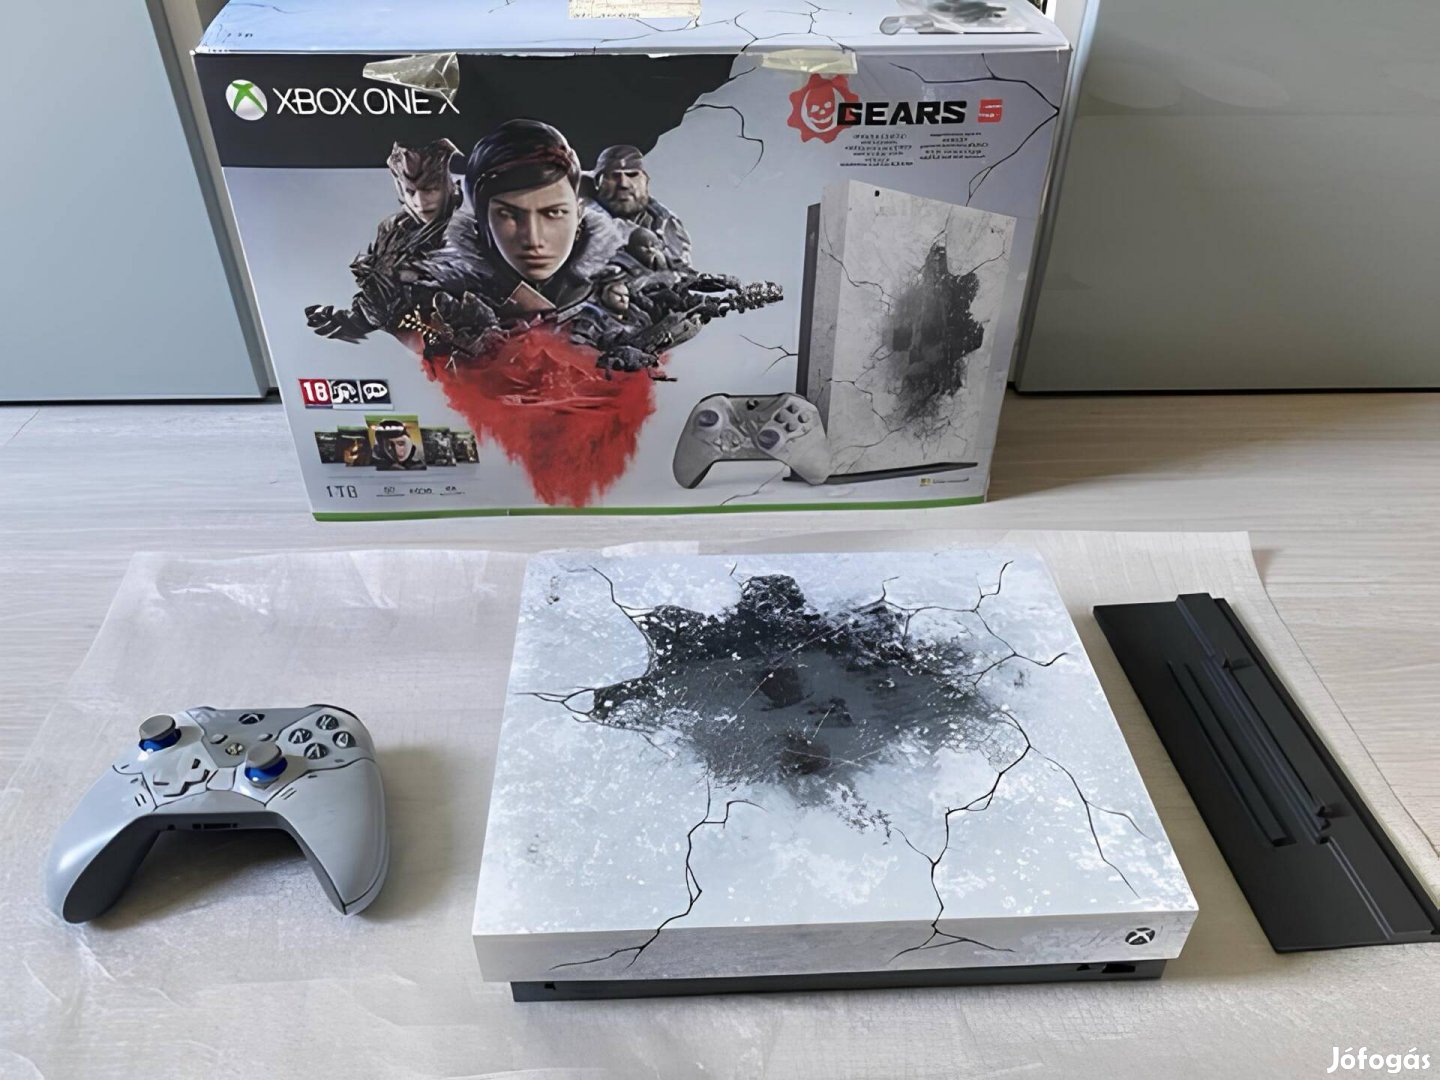 Gears 5 Limited Xbox One X